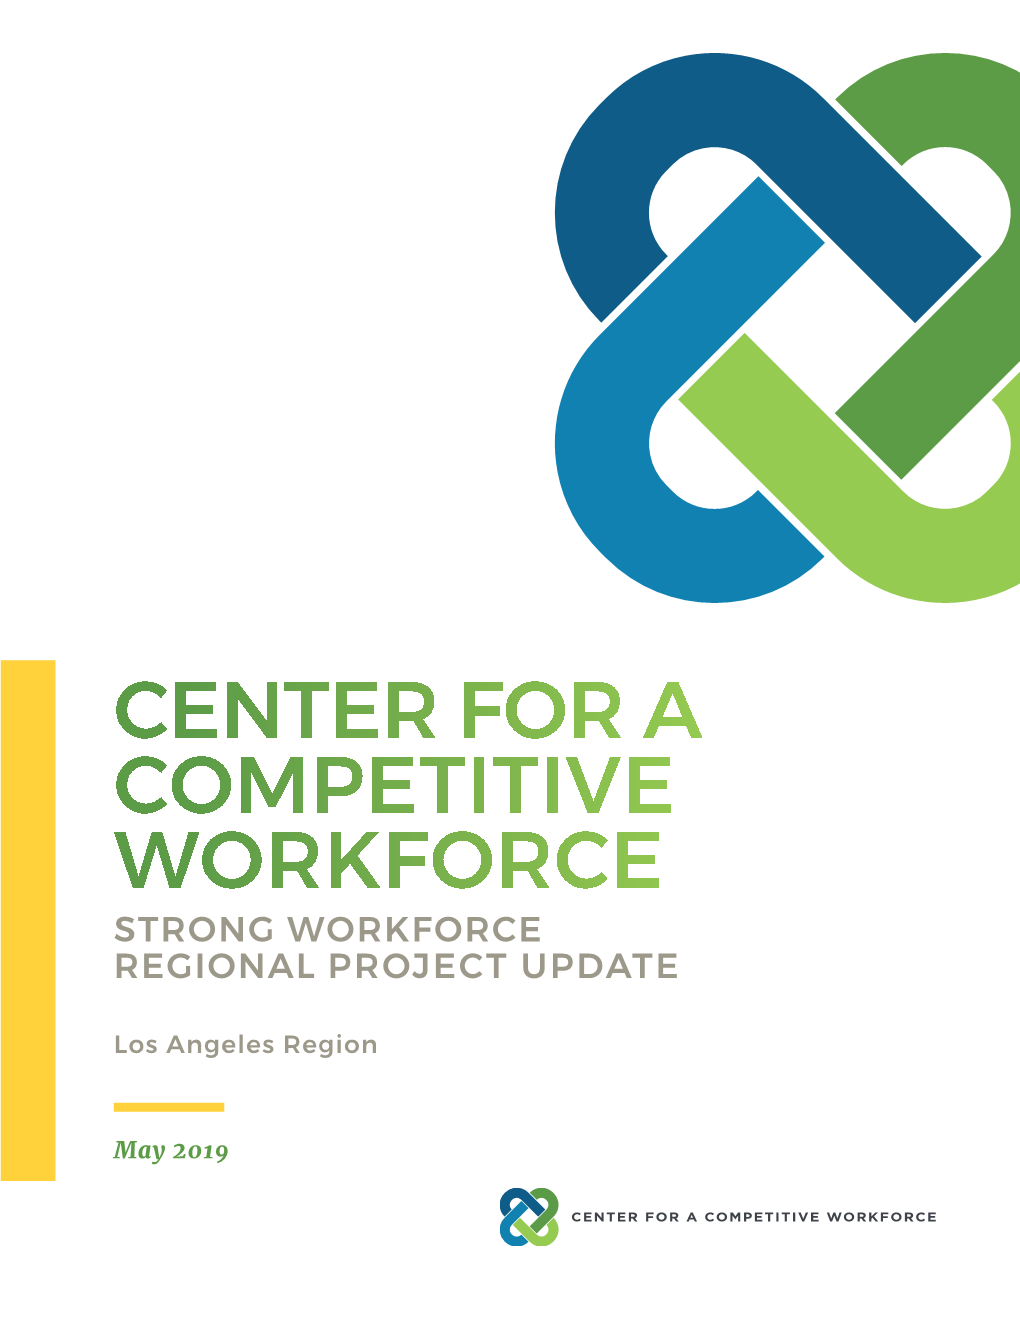 Center for a Competitive Workforce Strong Workforce Regional Project Update